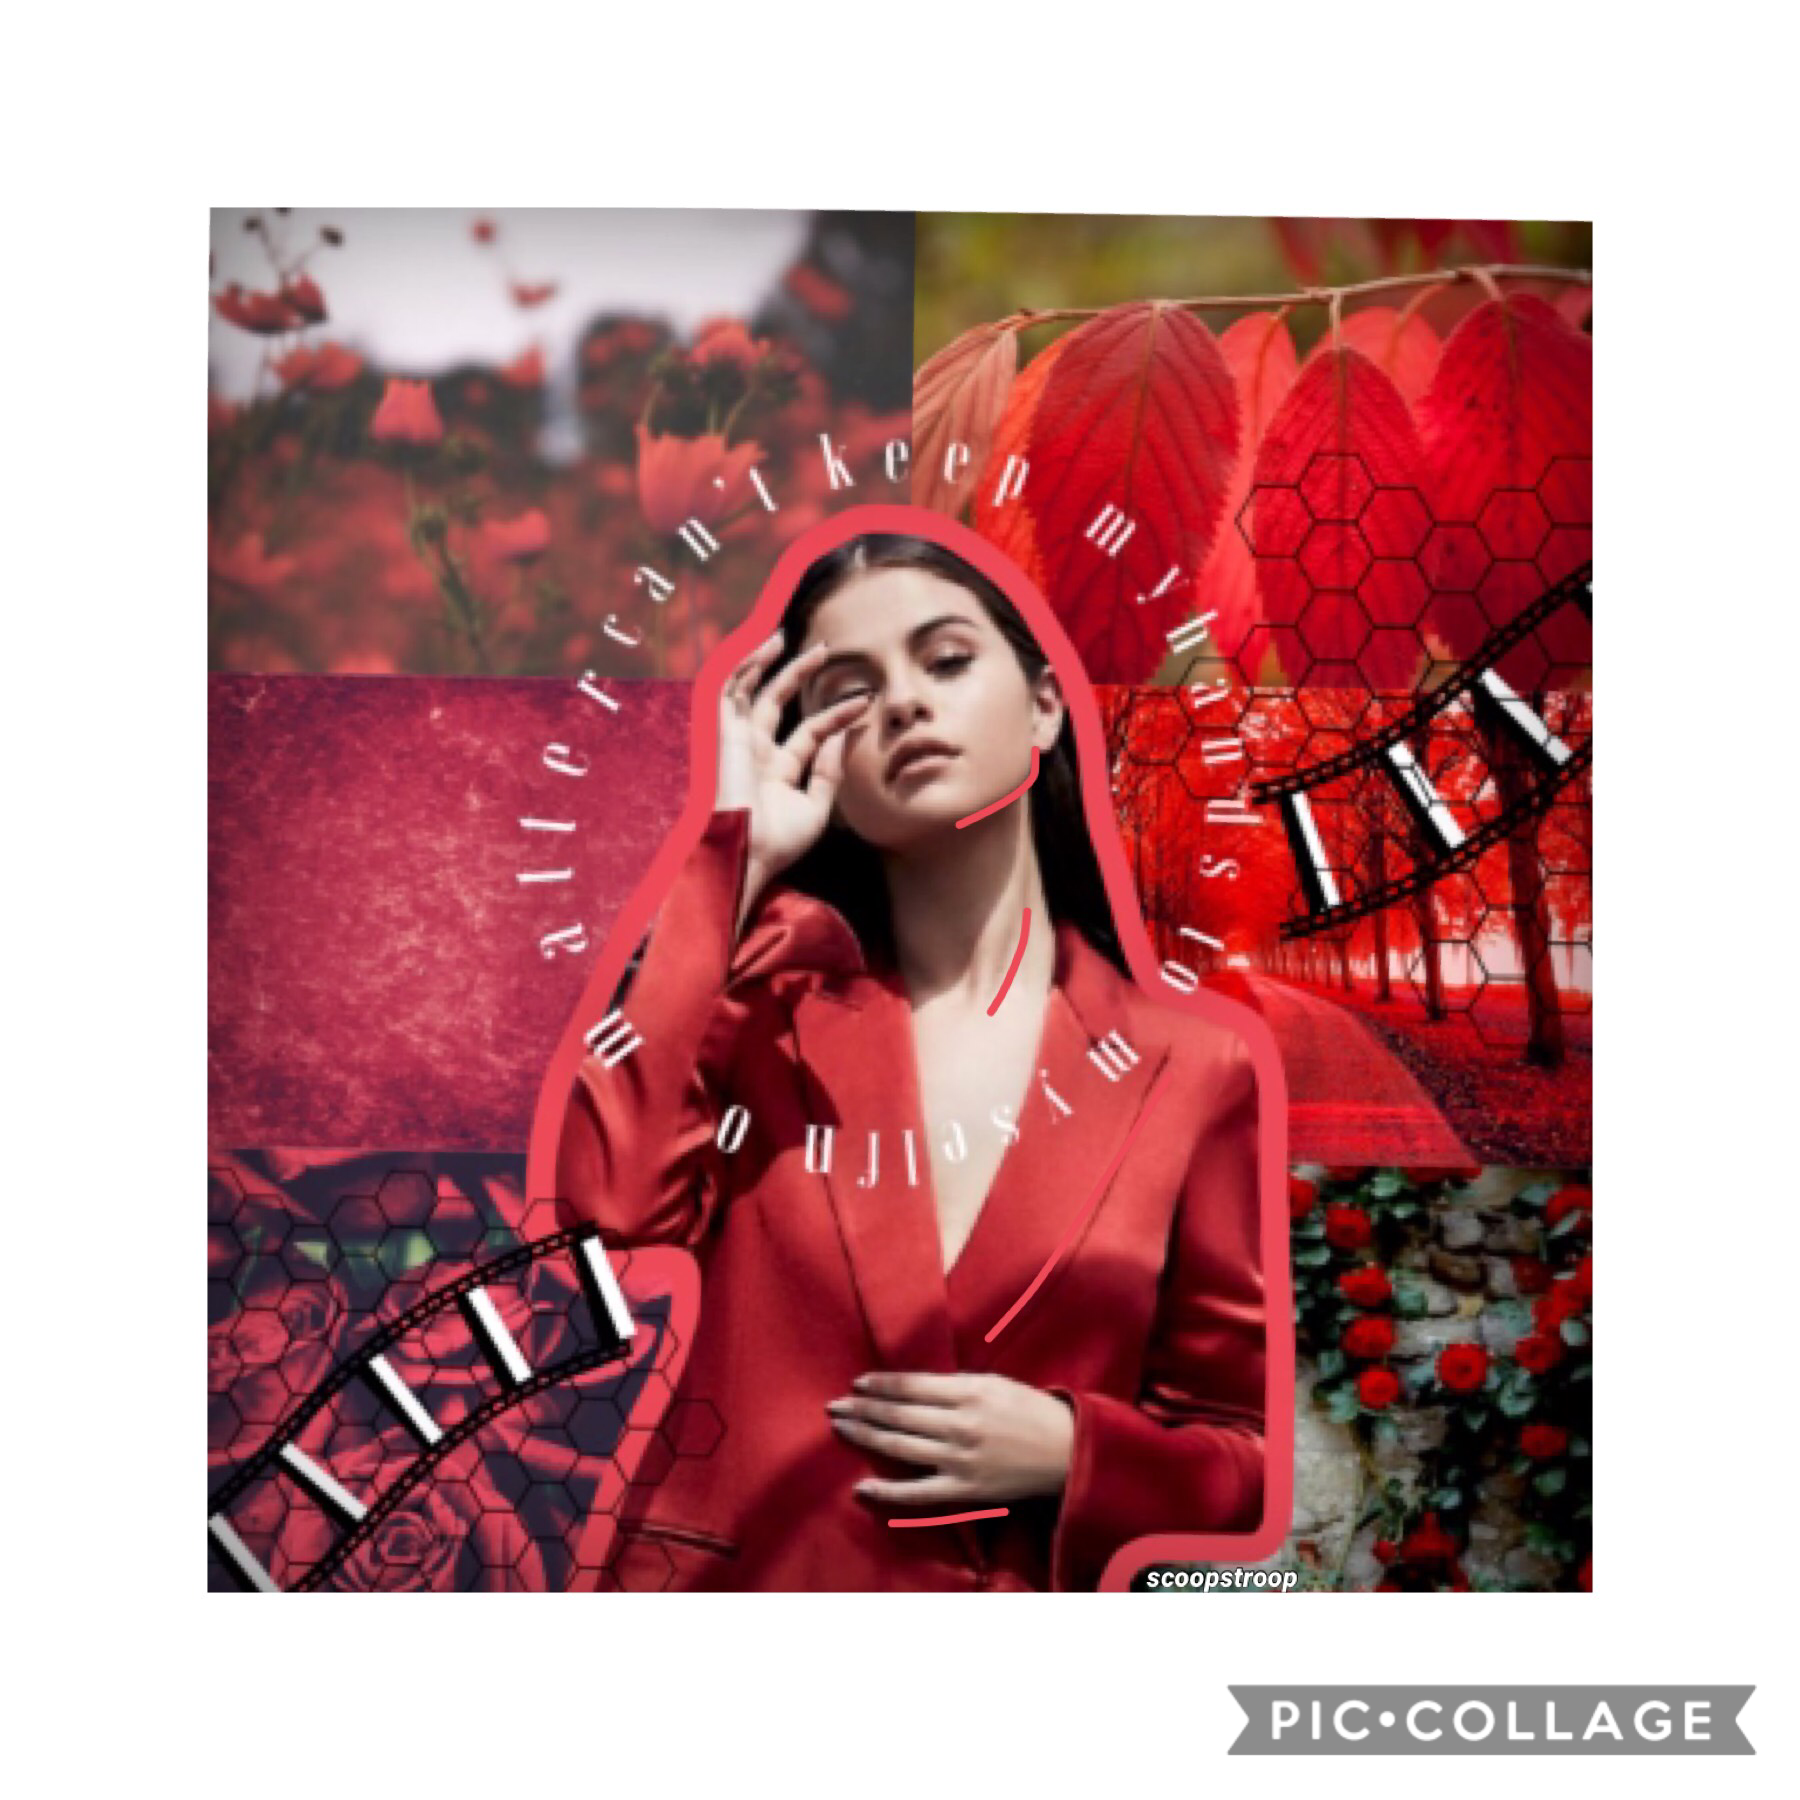 Tapity tap🌹


Enter my icon contest x due date 7th August 🦋